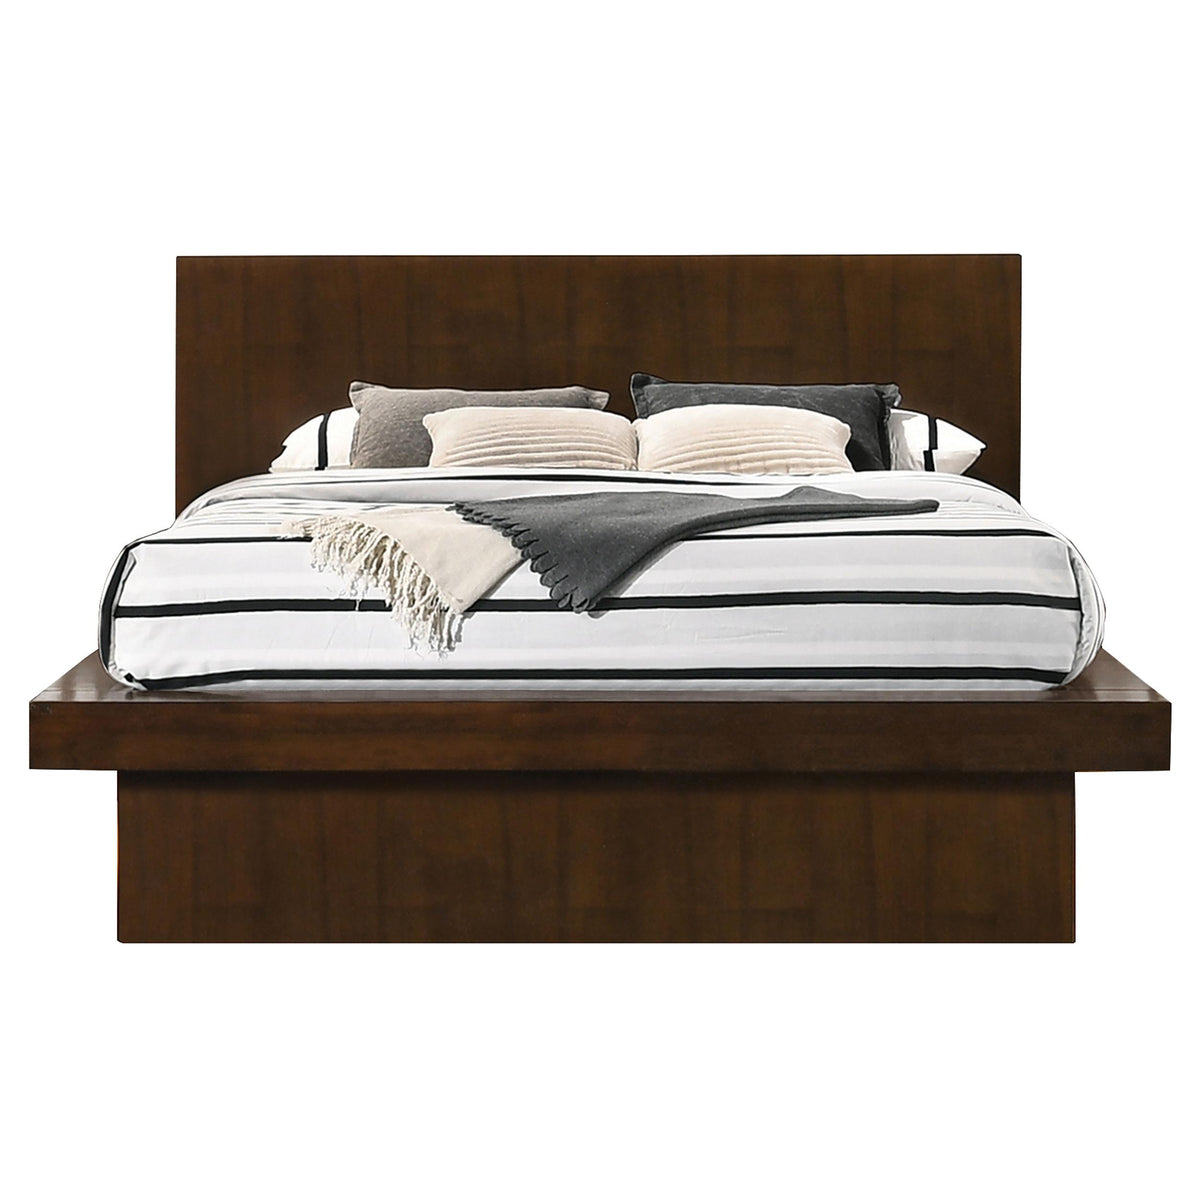 Jessica California King Platform Bed with Rail Seating Cappuccino Jessica California King Platform Bed with Rail Seating Cappuccino Half Price Furniture